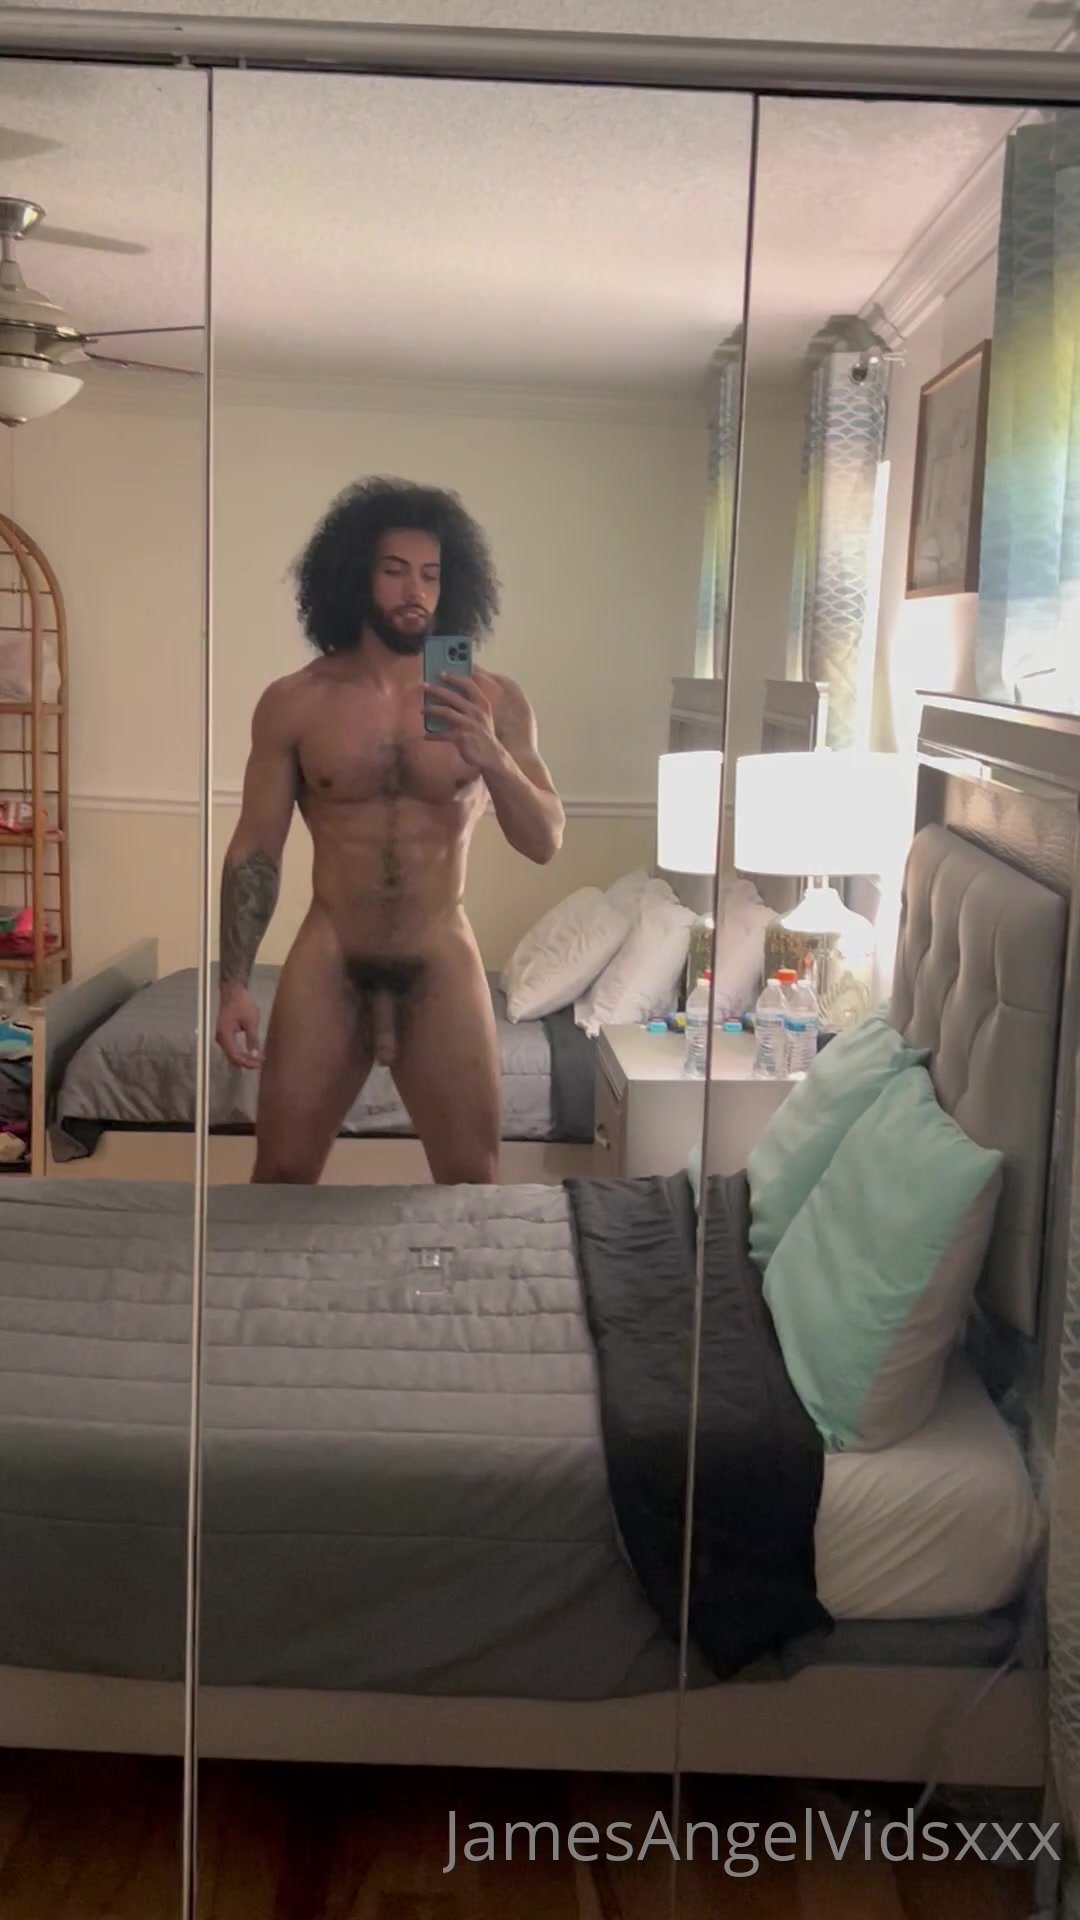 LIGHTSKIN HUNK SHOWS OFF HIS COCK 3